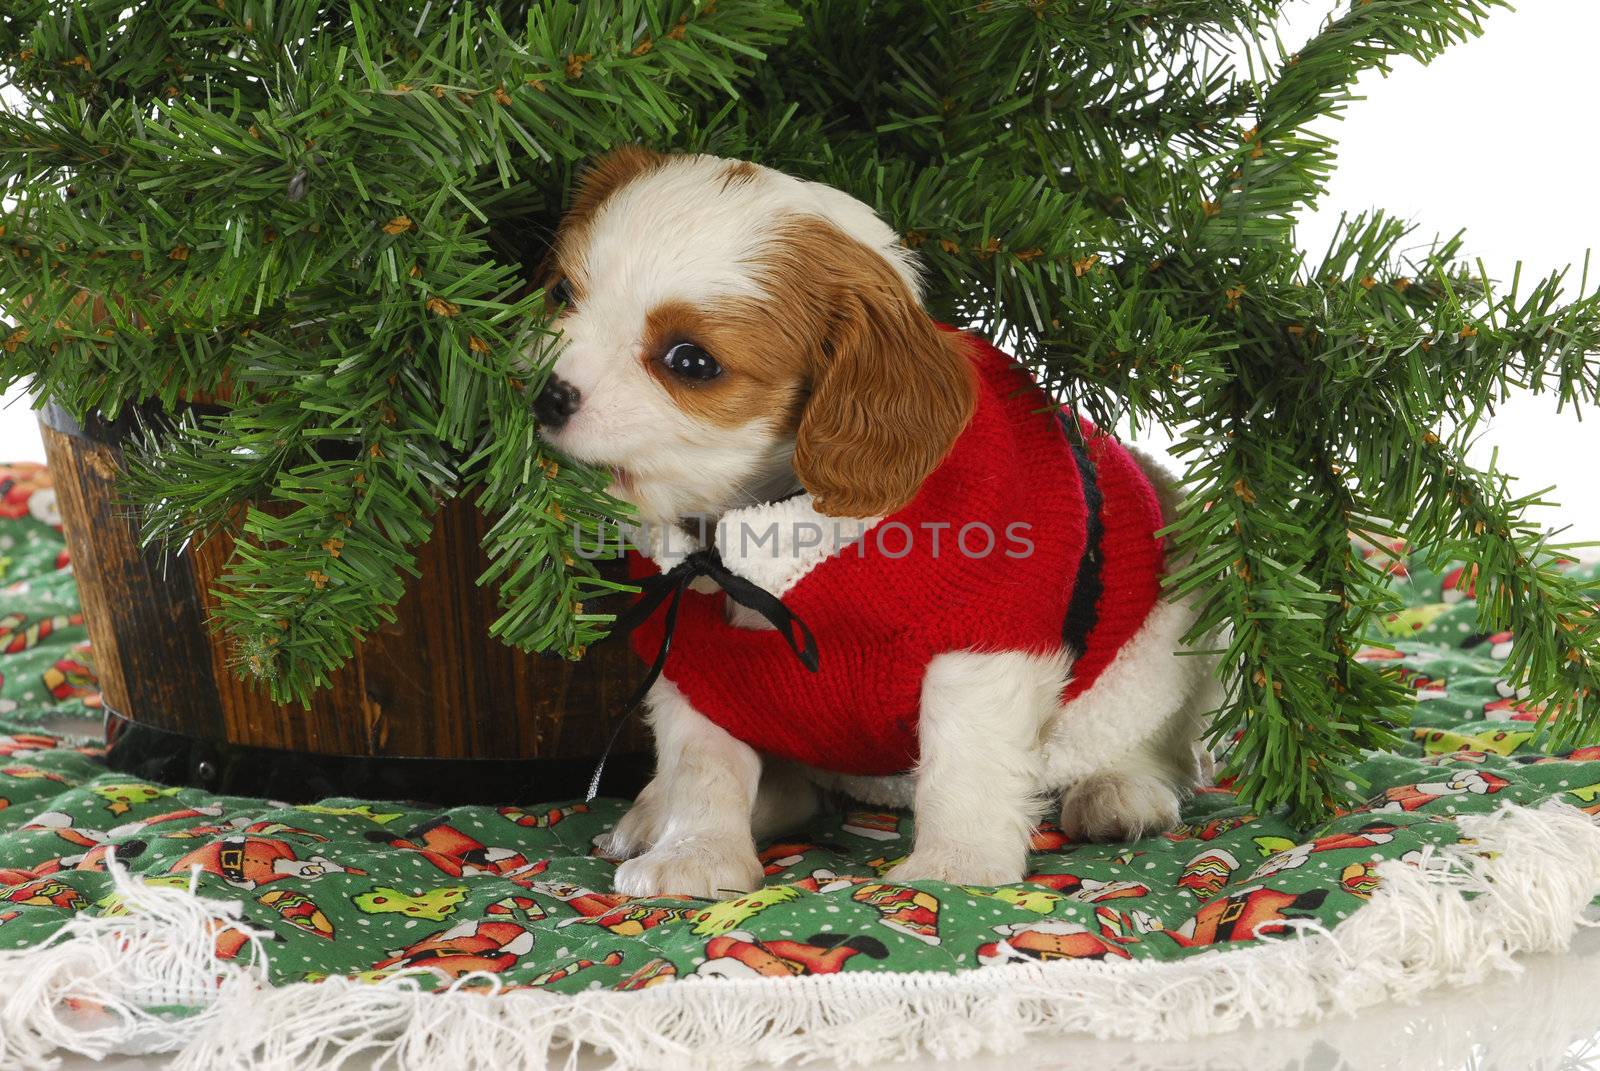 christmas puppy - cavalier king charles spaniel puppy under a christmas tree